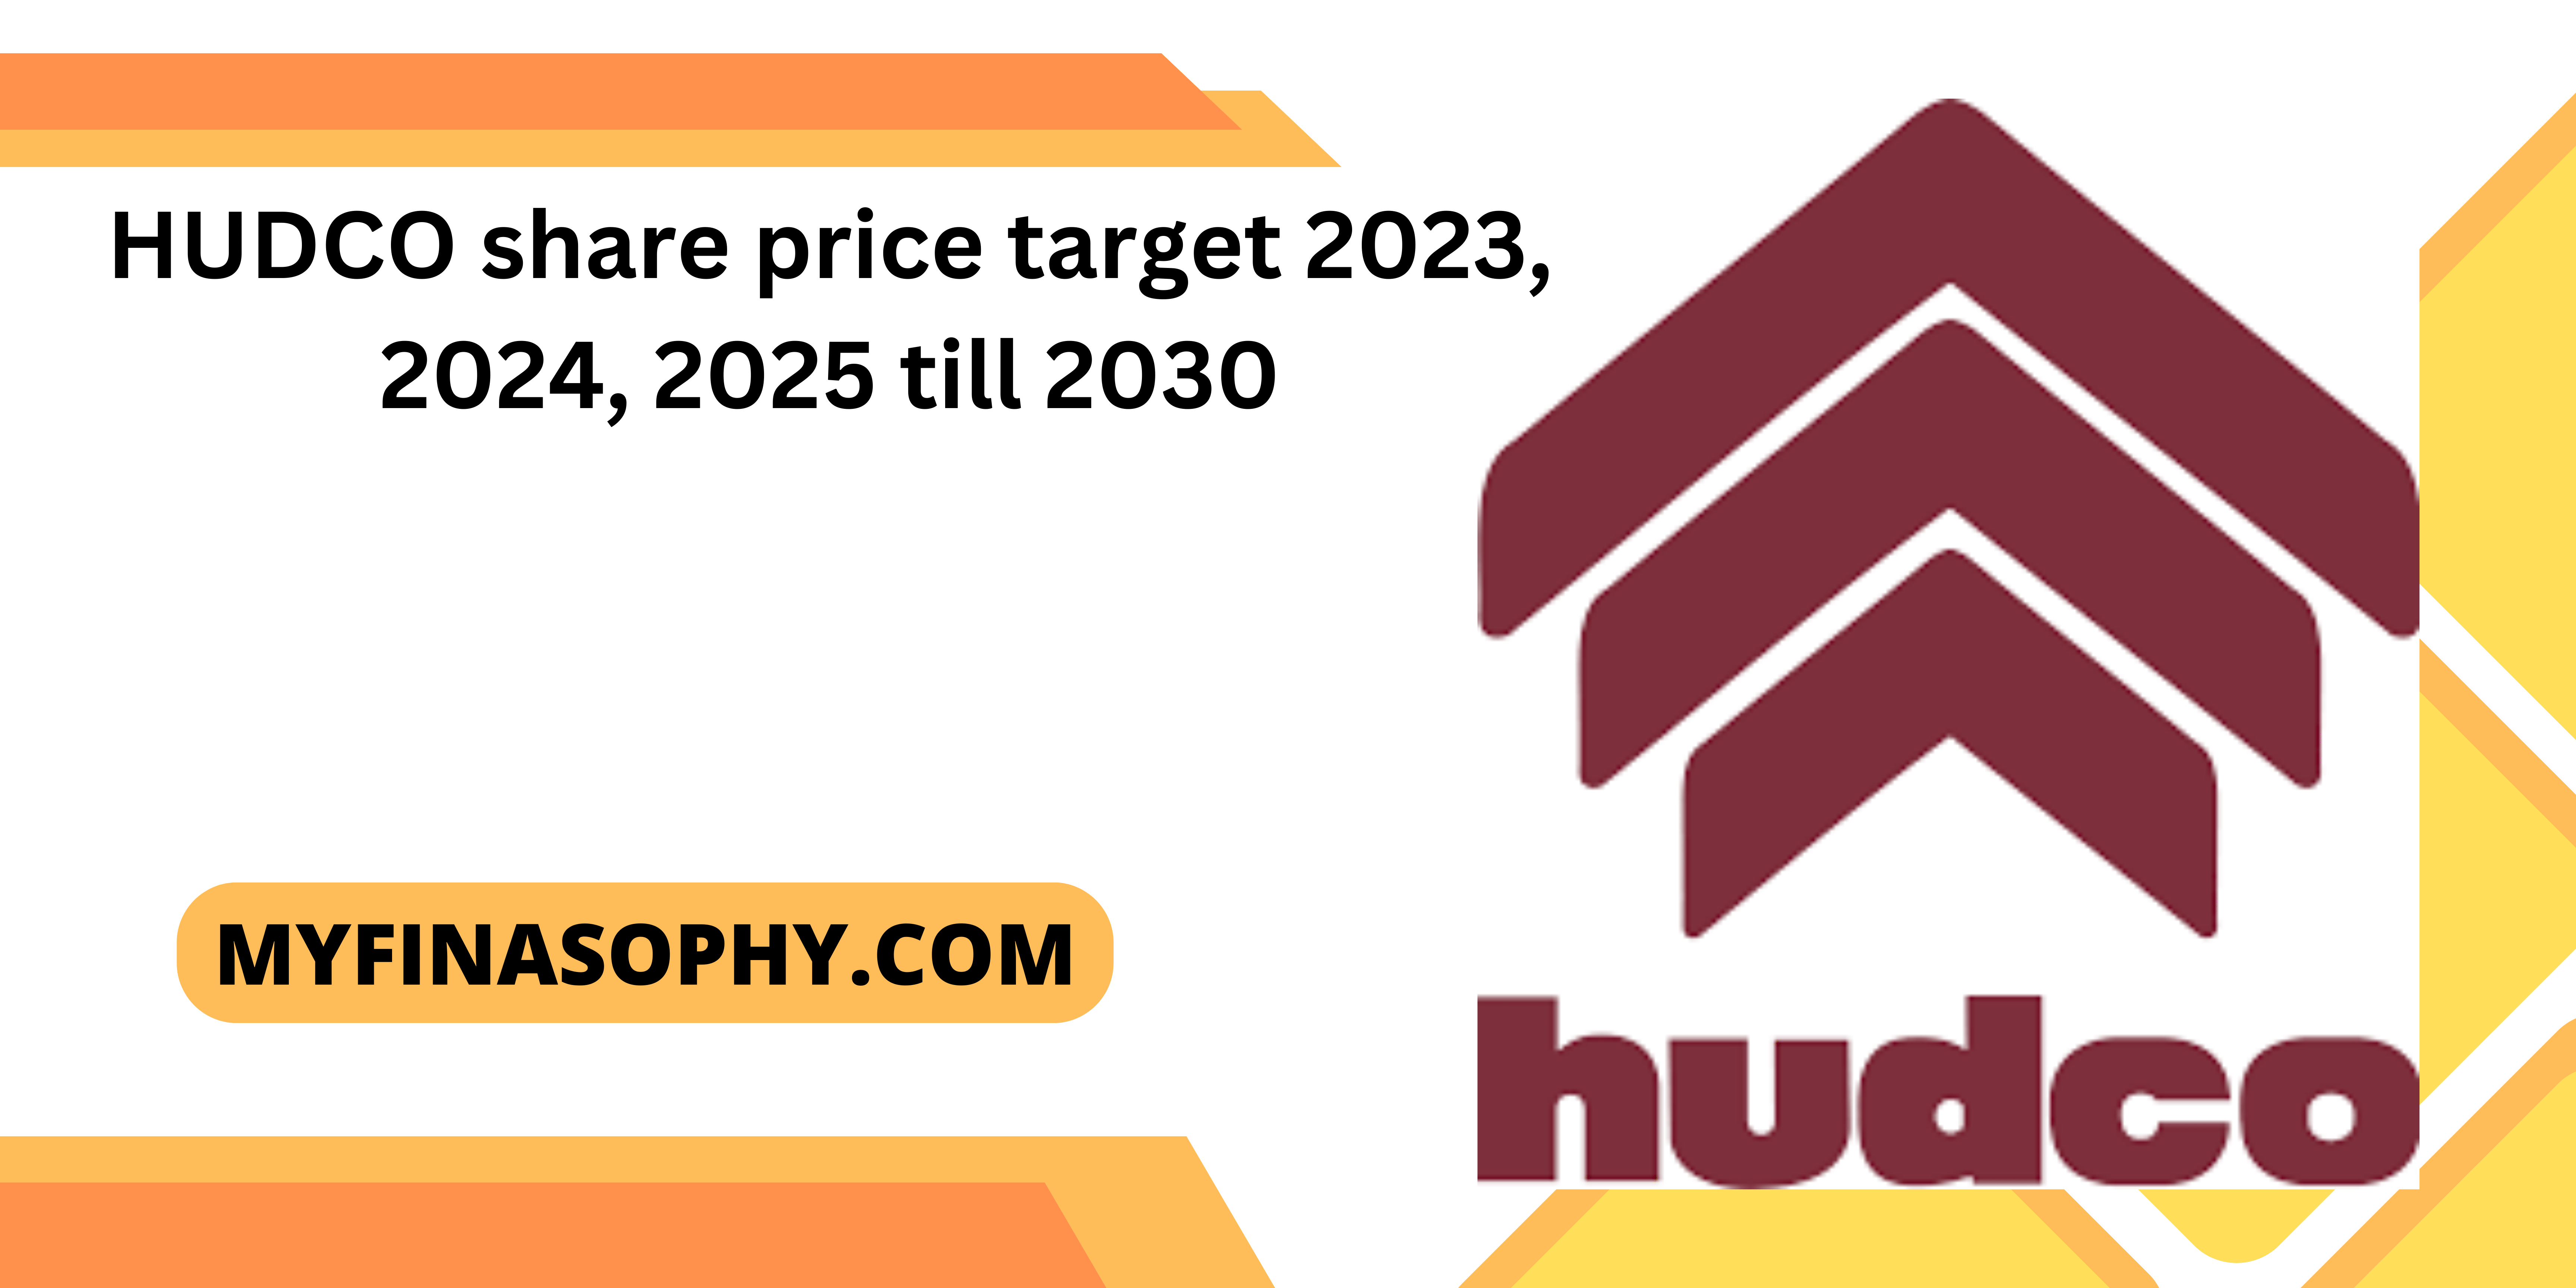 HUDCO share price target 2023, 2024, 2025 and 2030